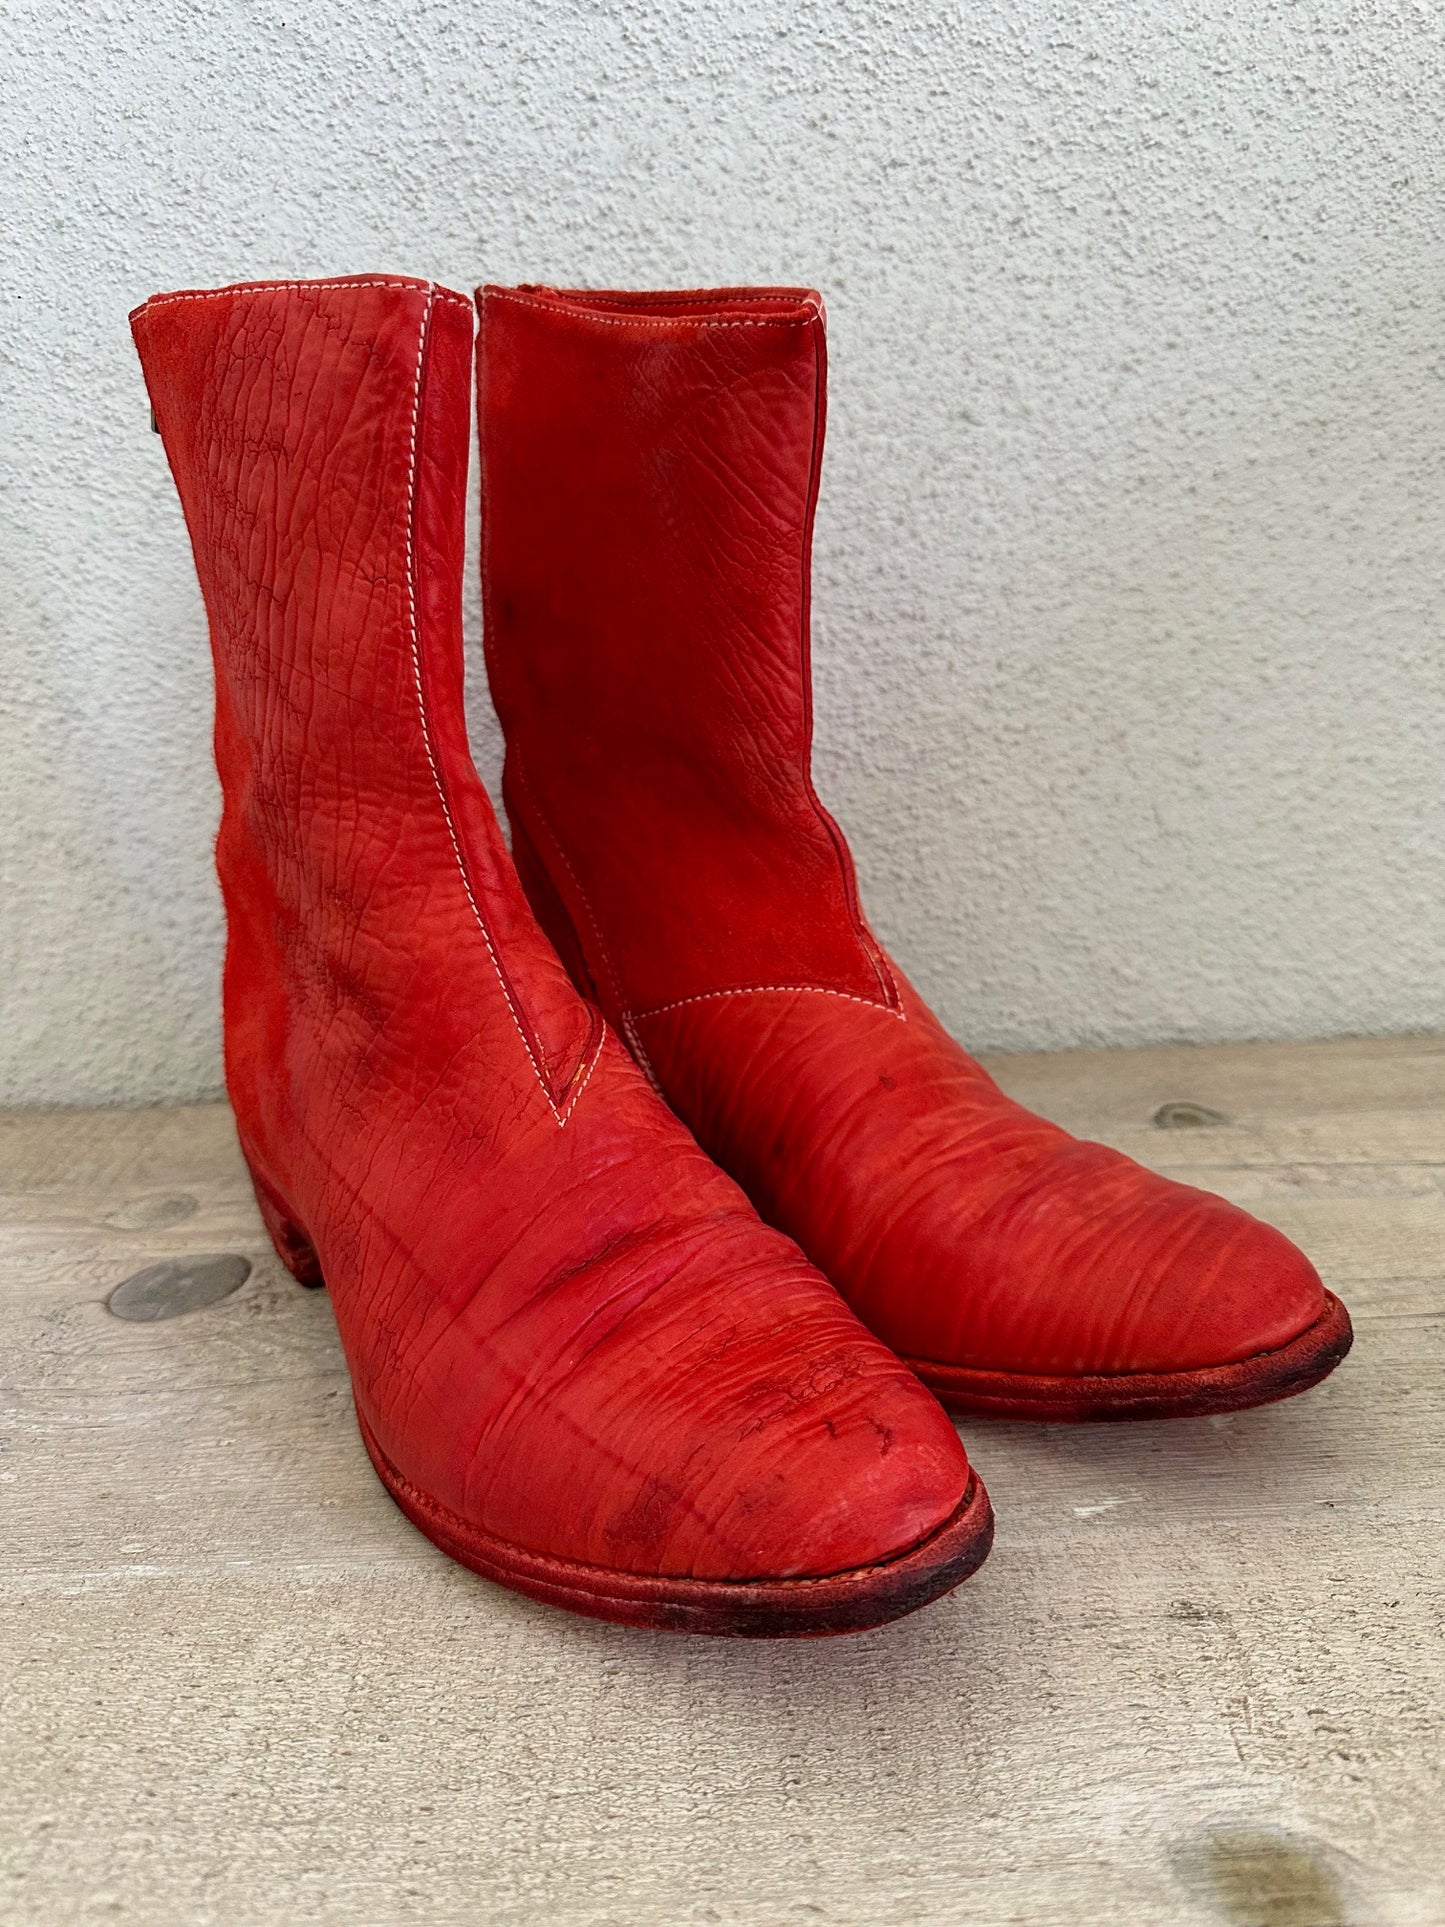 Red Object Dyed Culatta Horse Diagonal Zipper Boots AM2601L CUBS-PTC13 by Carol Christian Poell